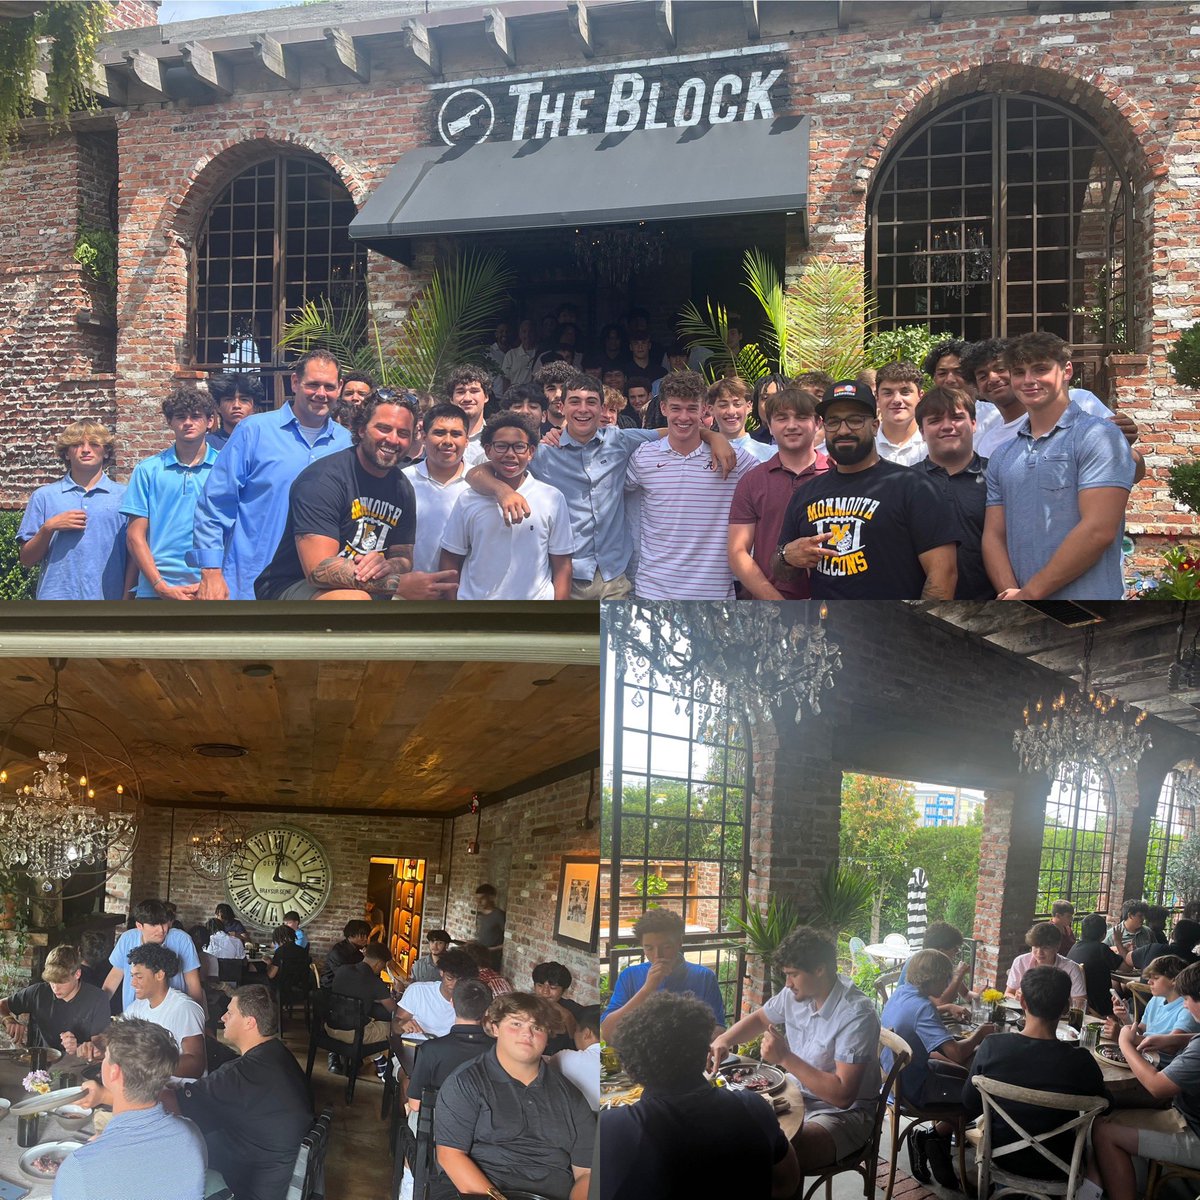 Thank you to @theblocknj and Monmouth Regional Hall of Fame QB Tom D’Ambrisi for sponsoring our season kickoff lunch